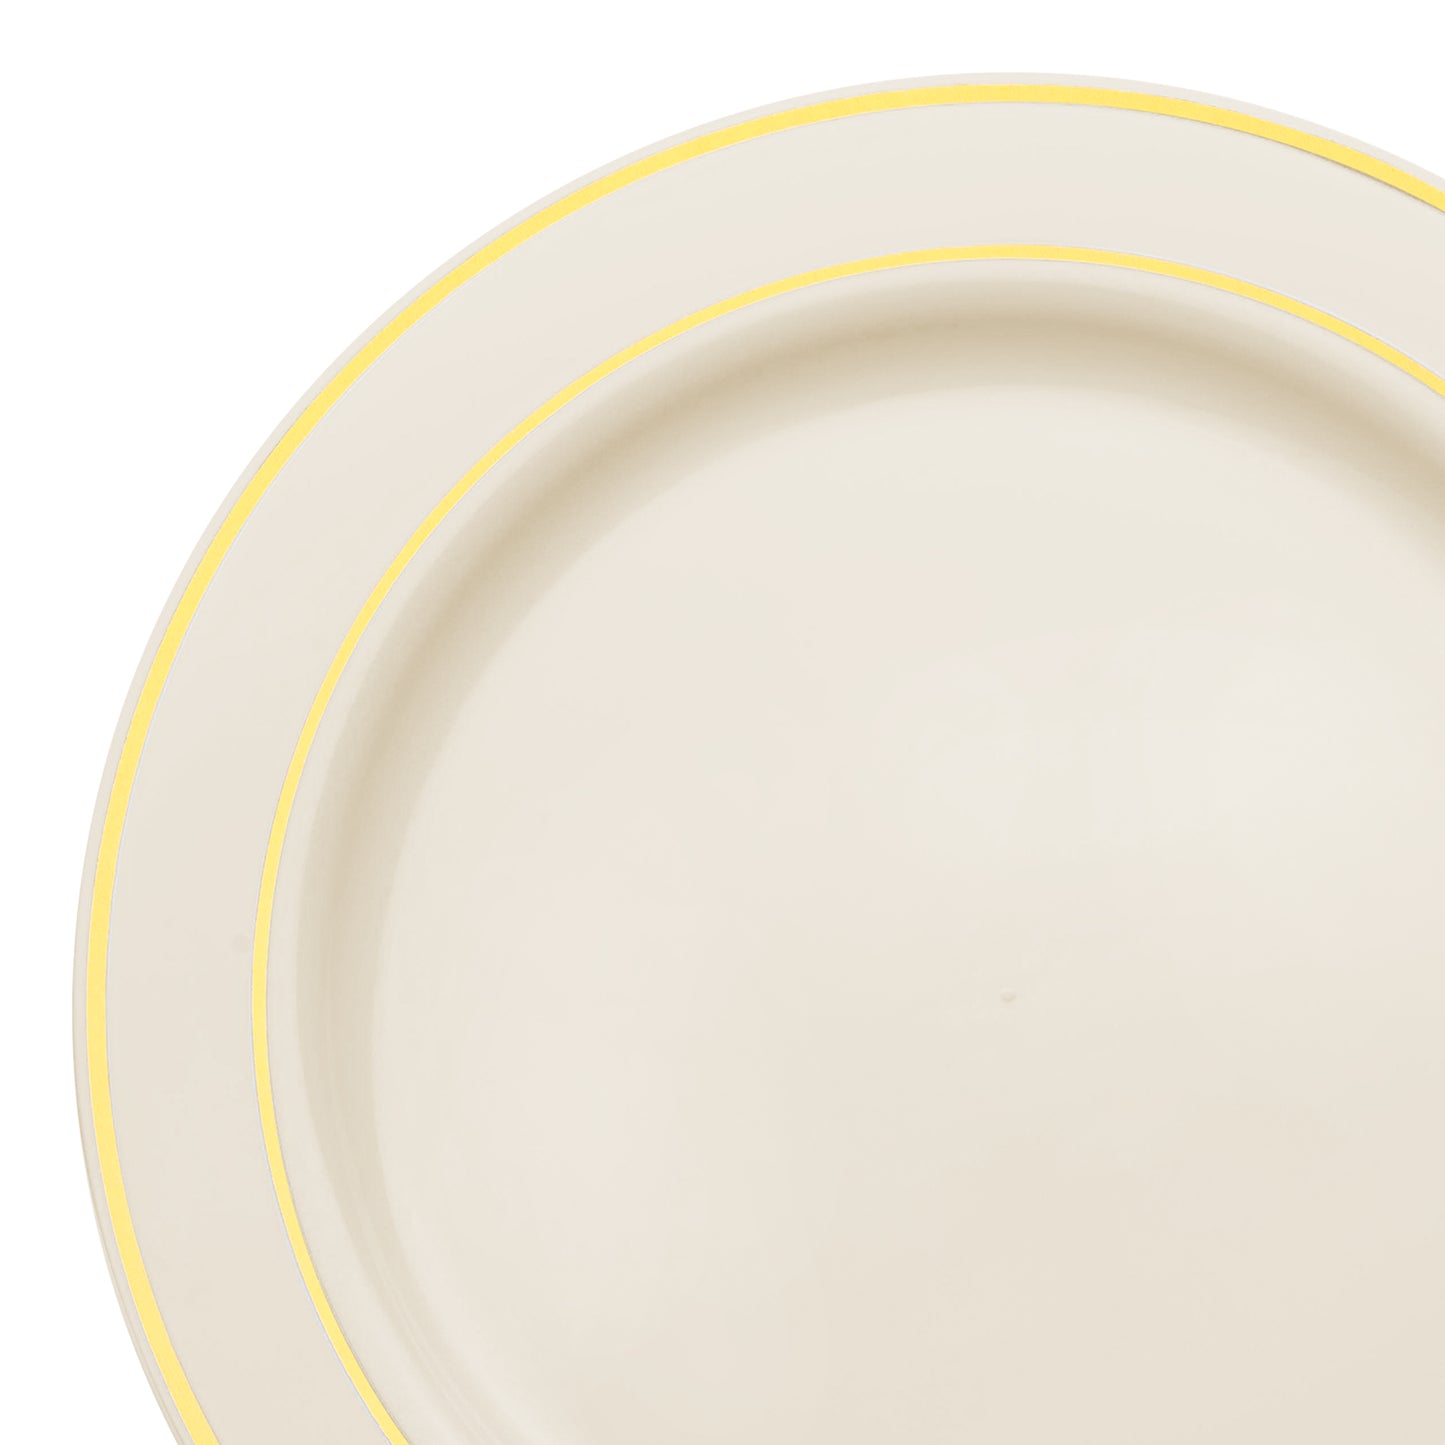 Ivory with Gold Edge Rim Plastic Dinner Plates (10.25") Main | The Kaya Collection